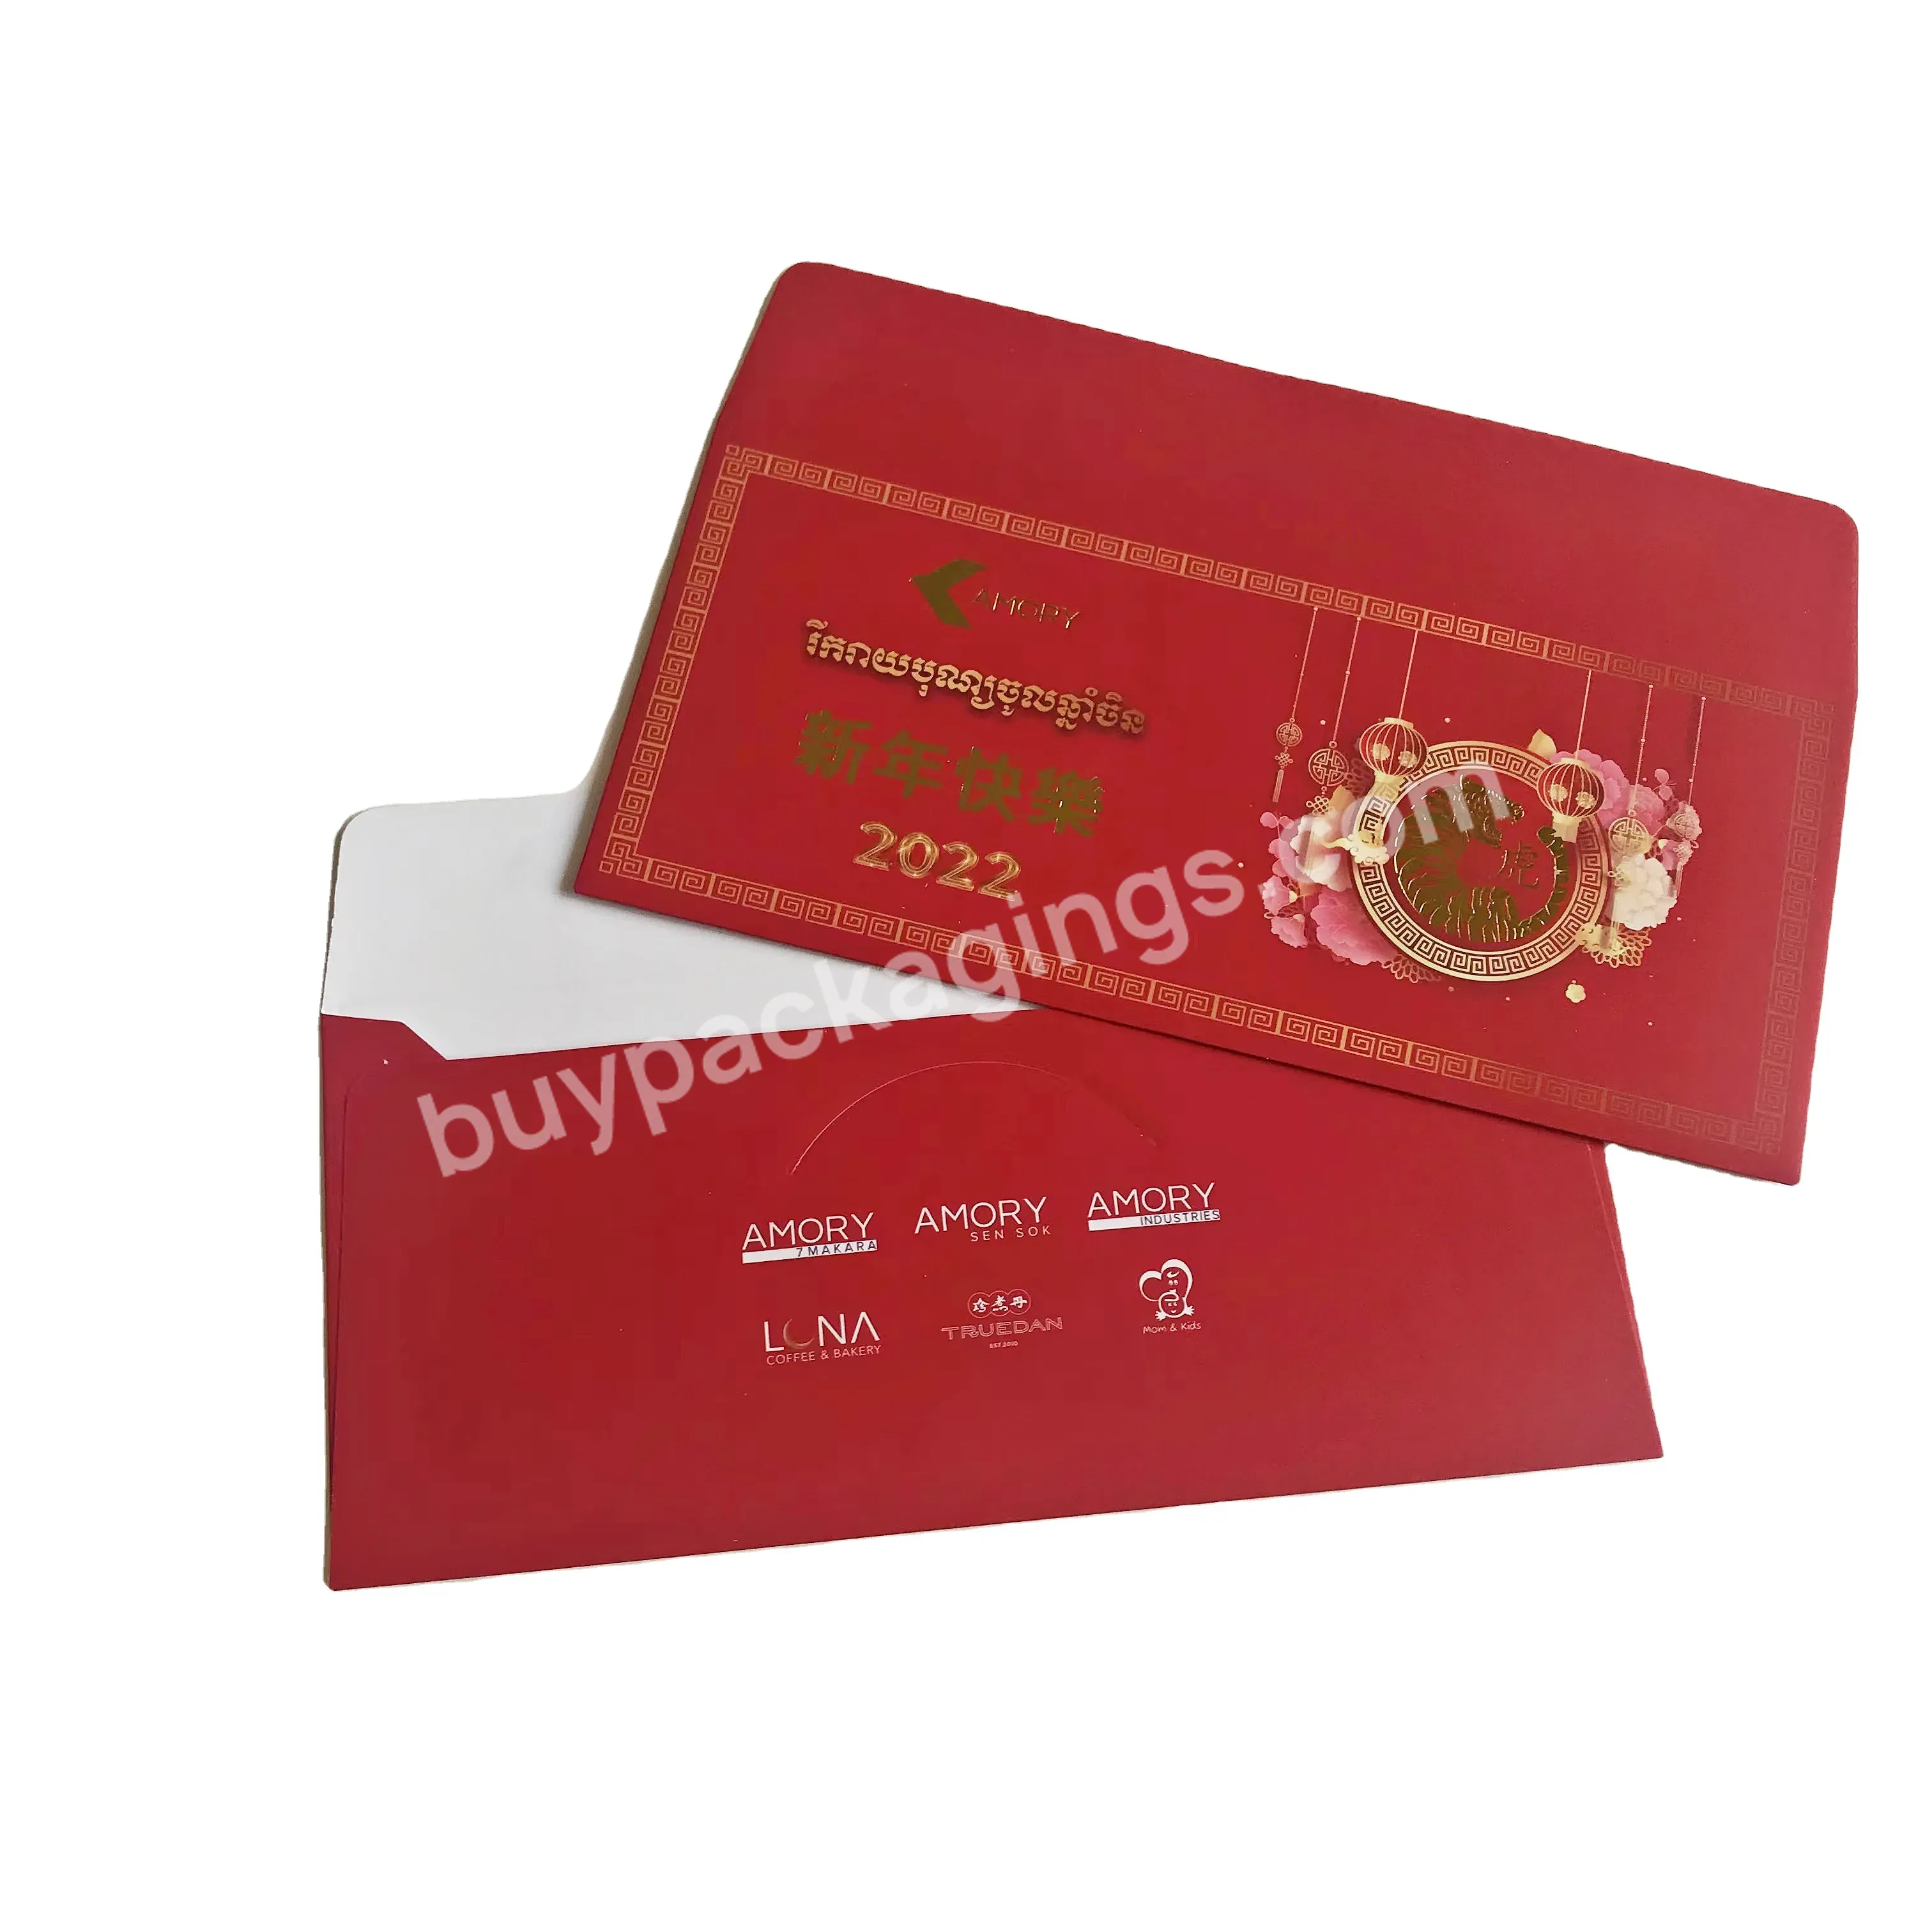 Nice Design Luxury Quality Many Colors Colorful Customized Size Paper Personalized Gift Voucher Envelope - Buy Personalized Gift Voucher Envelopes,Voucher Envelopes,Gift Voucher Envelopes Luxury Quality.